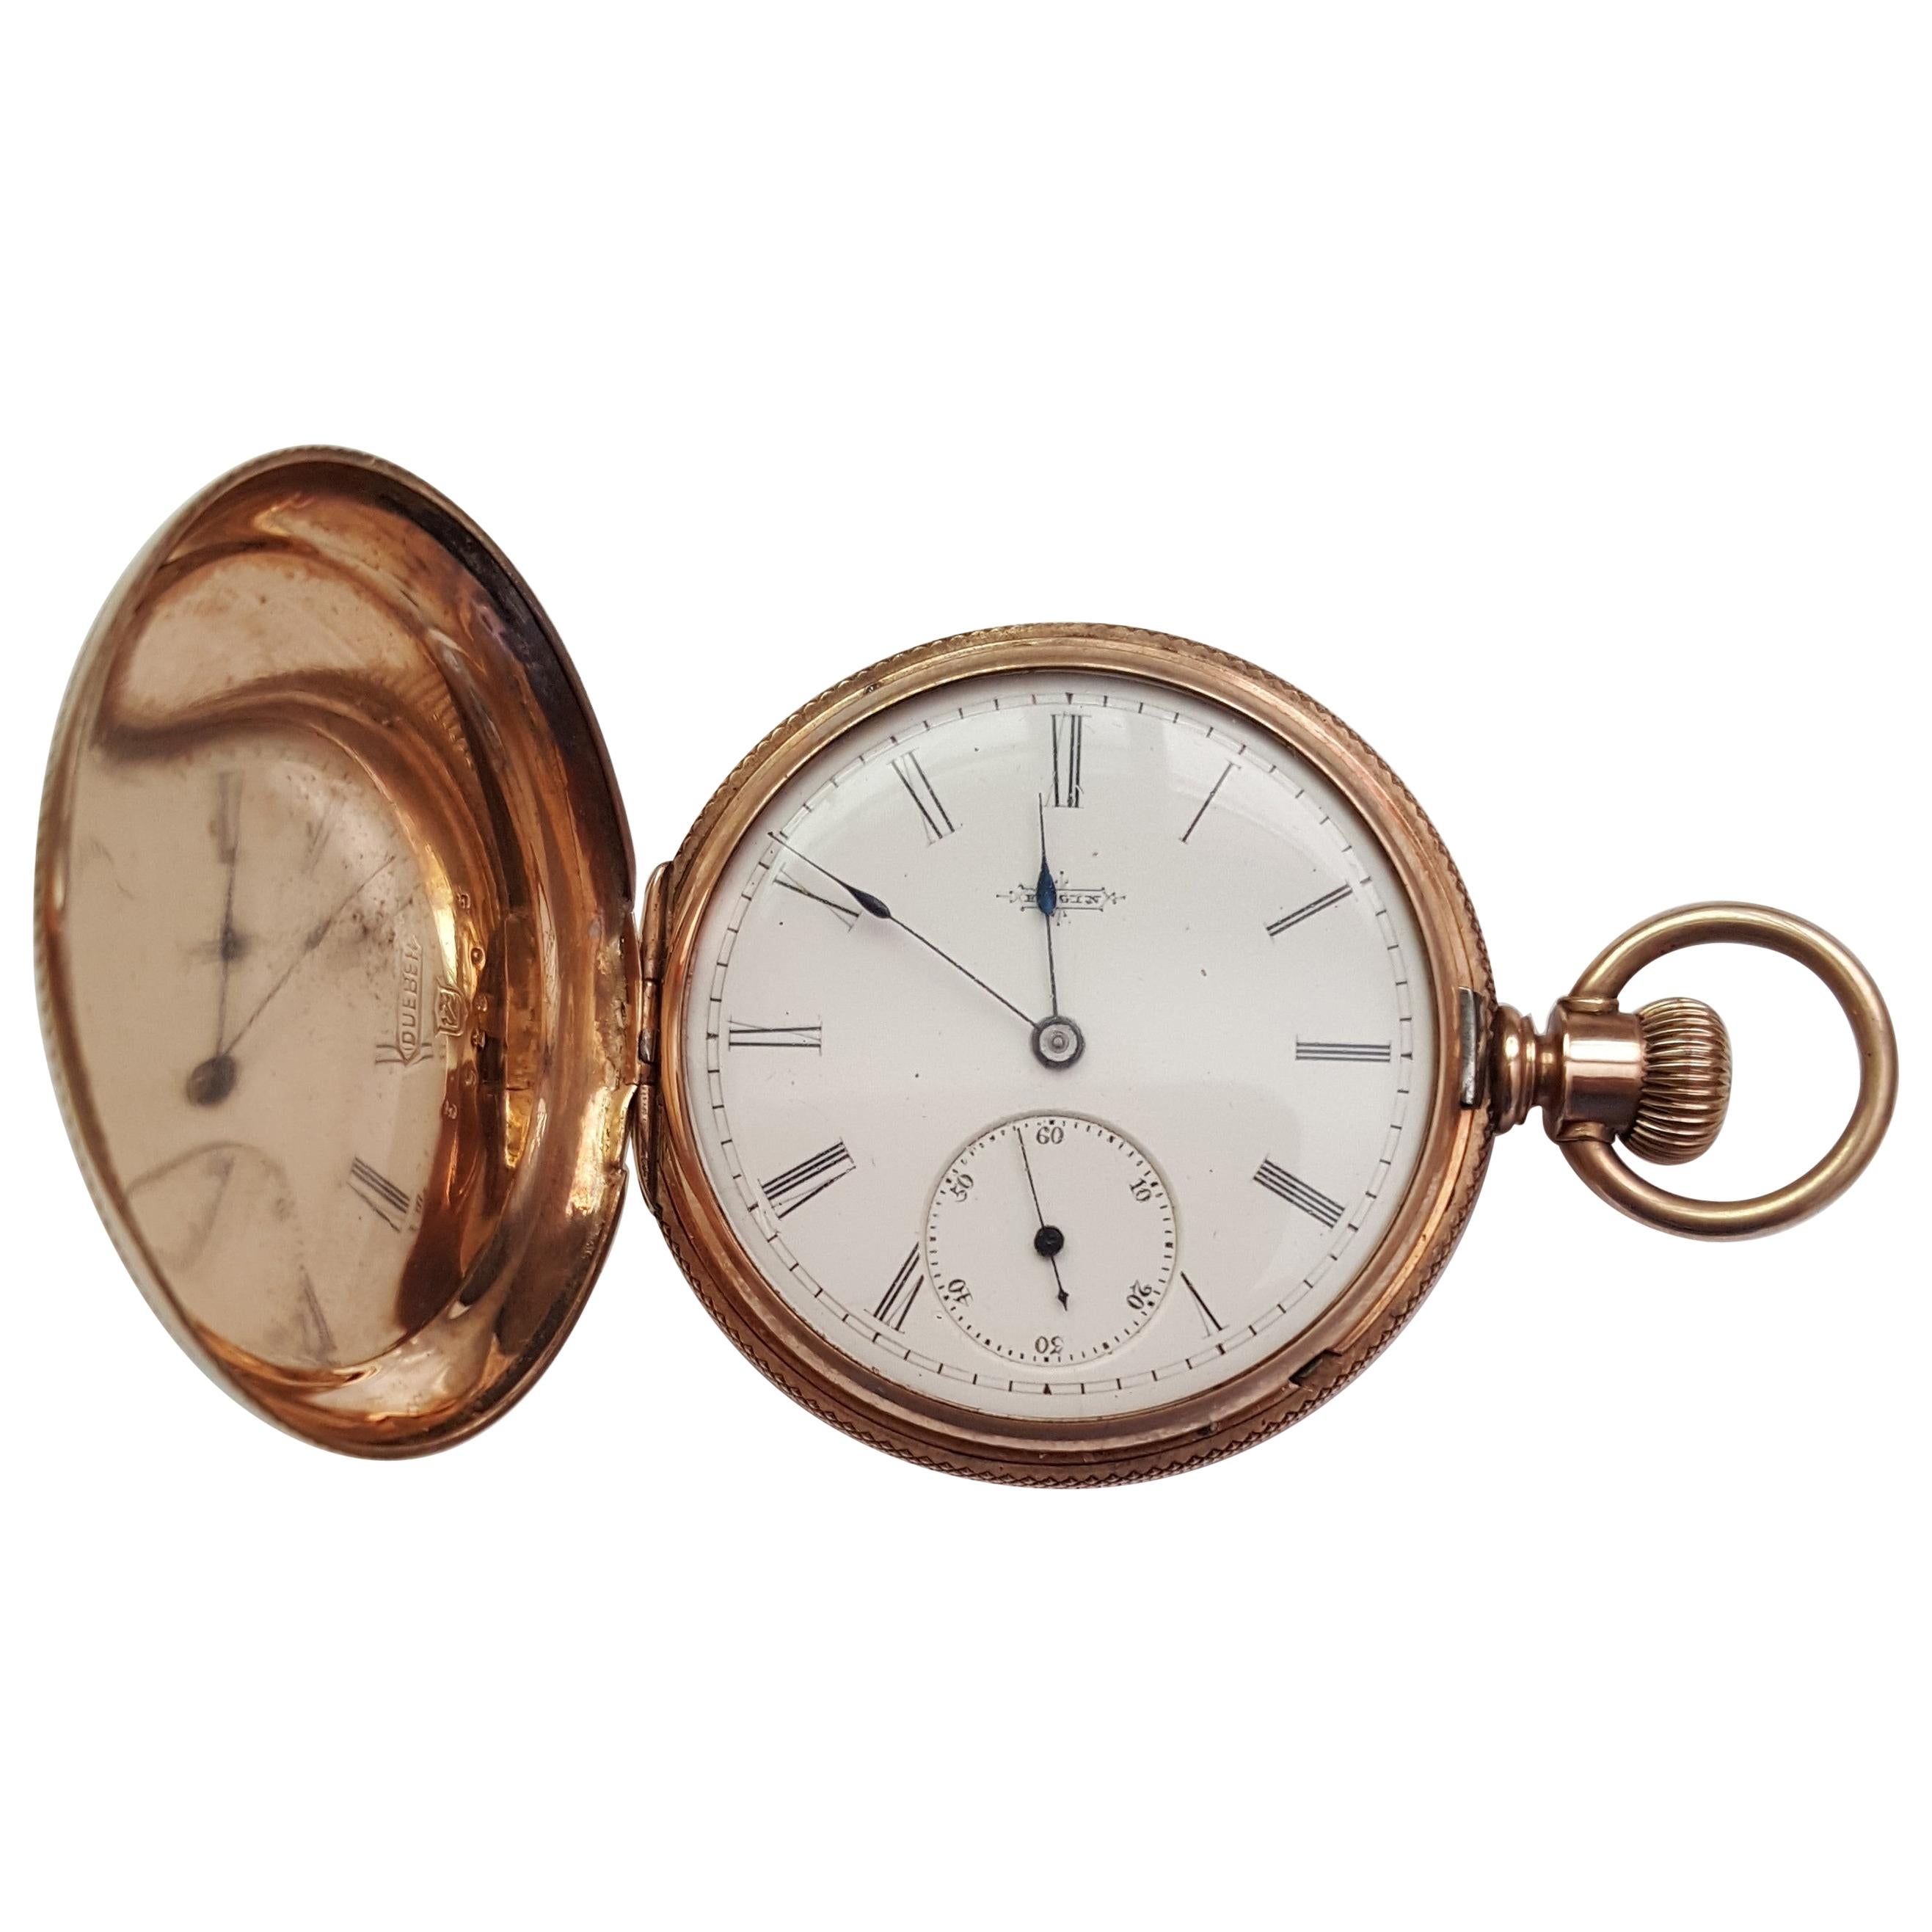 Vintage Gold-Plated Elgin Pocket Watch, Year 1883, Working, 11 Jewel